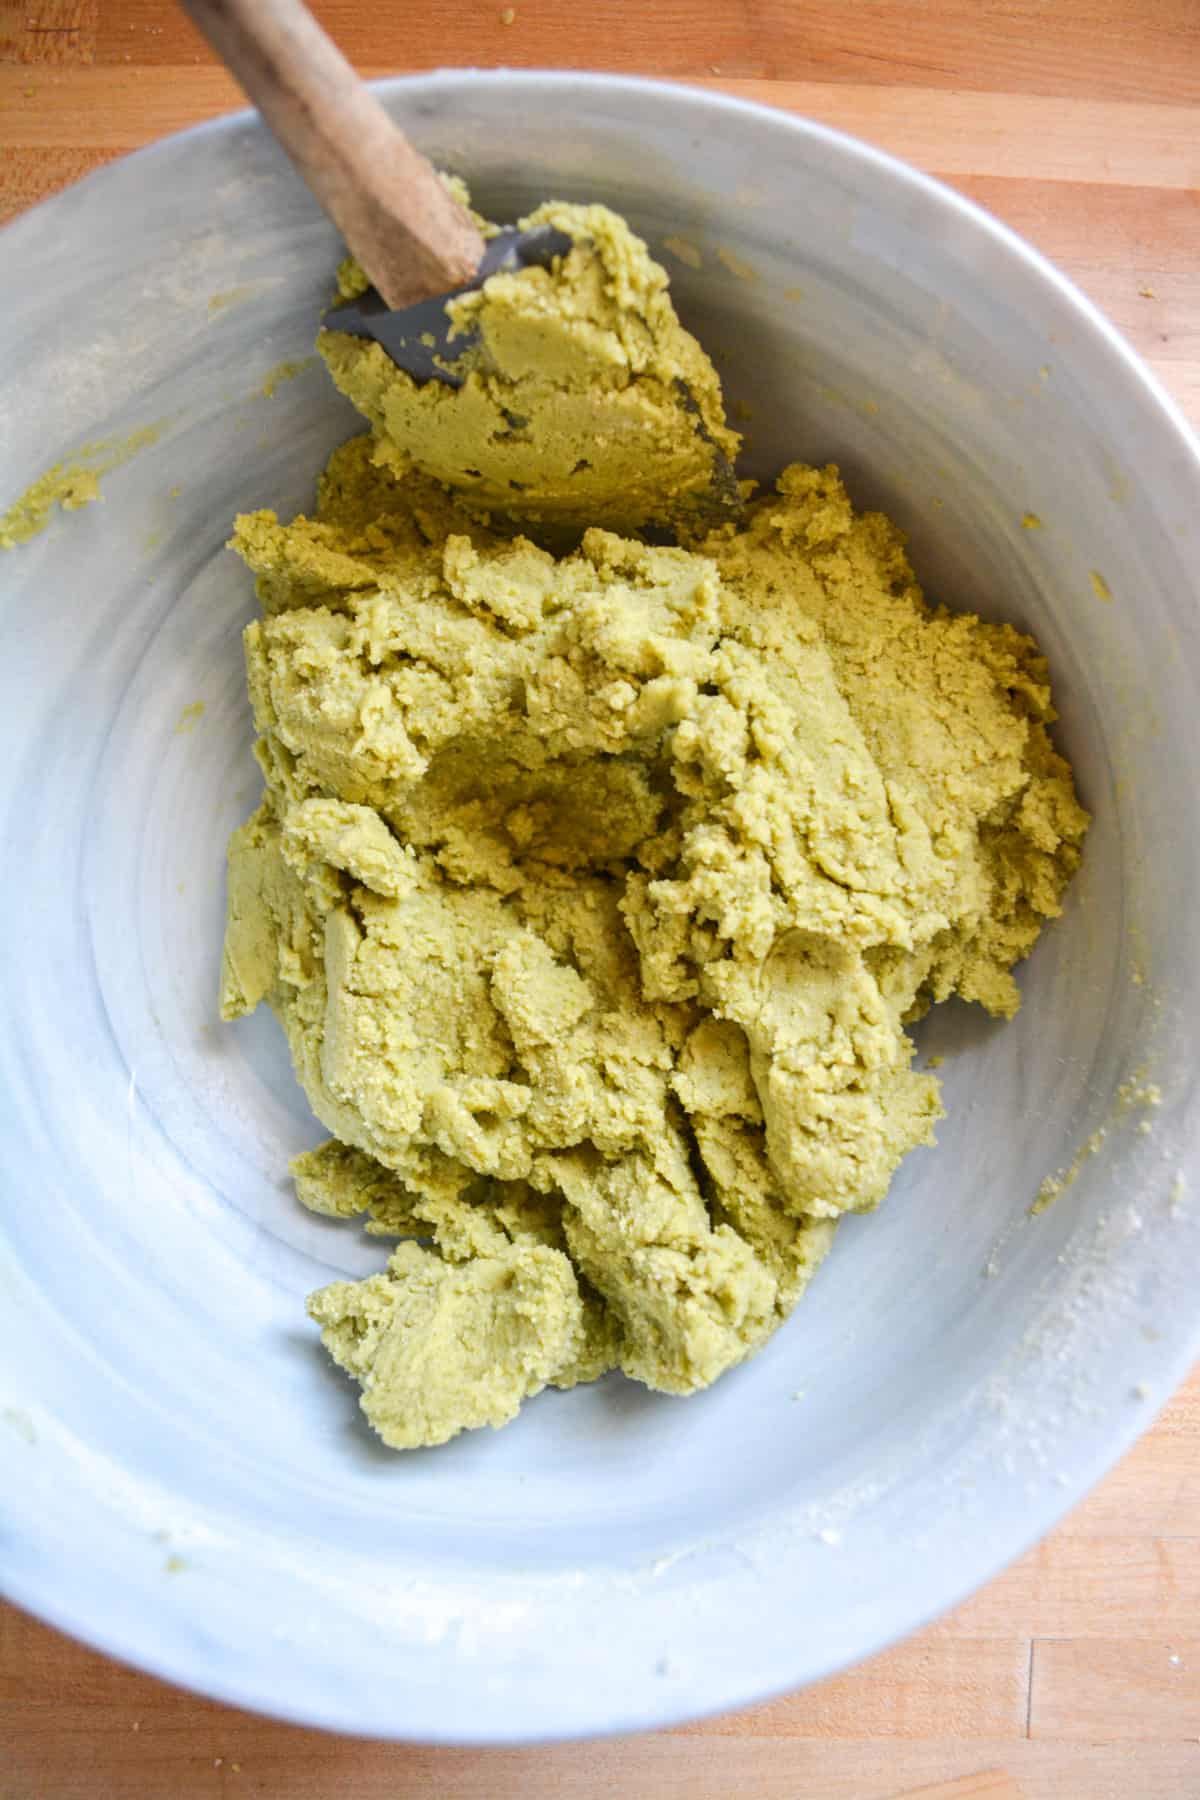 Matcha powder, and dry ingredients mixed into the sugar cookie dough.